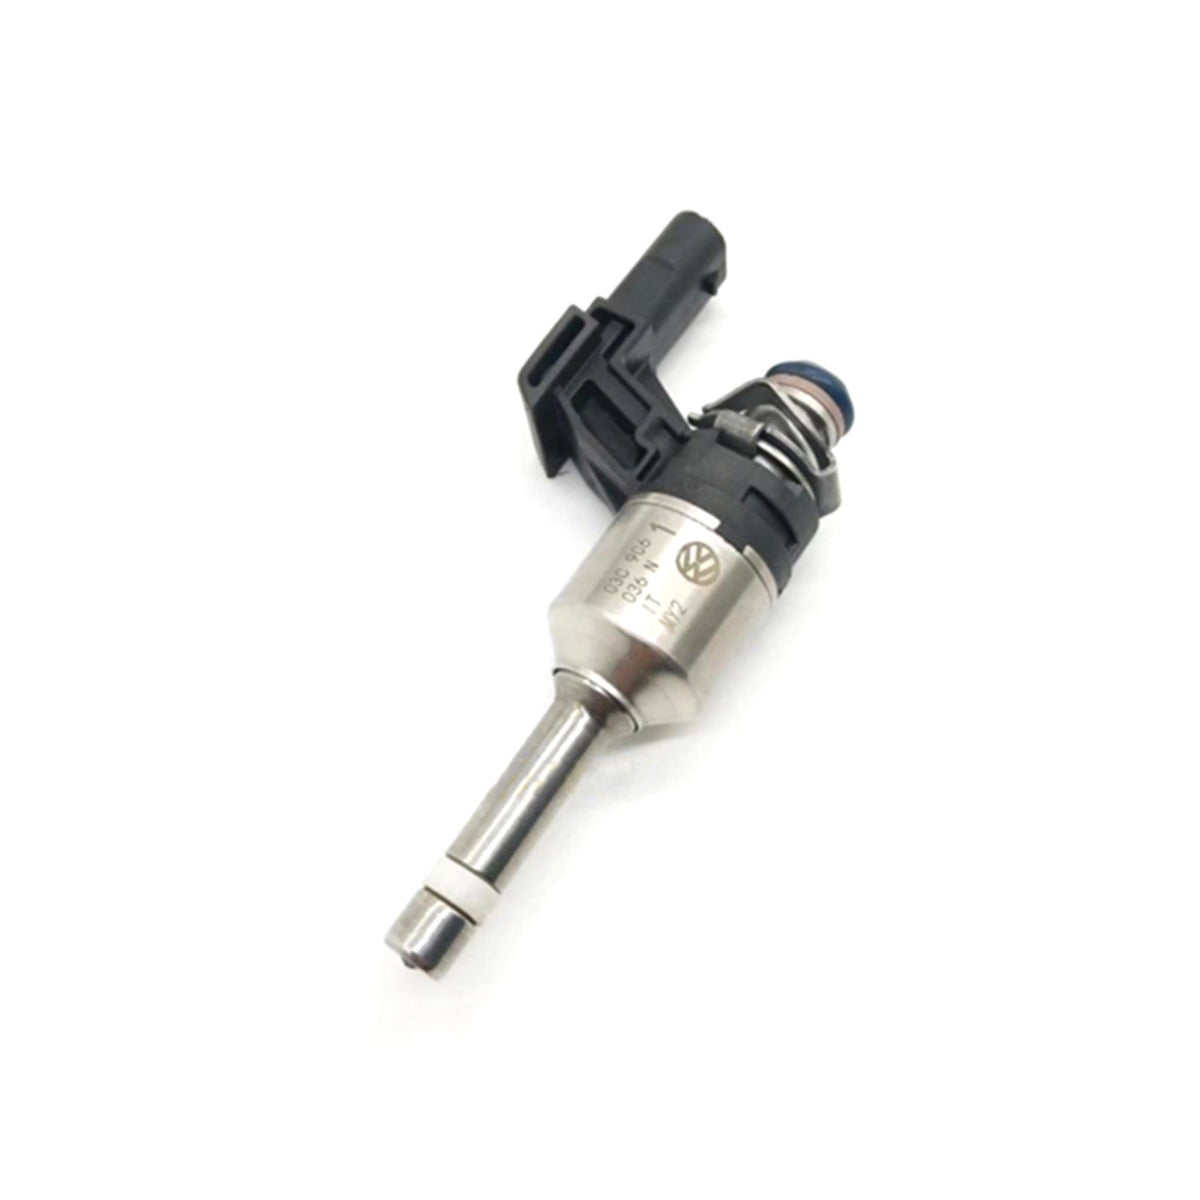 Fuel Injector 03C906036M, Fuel Injector For VW Golf Jetta Passat Audi, Car Fuel Injector, Auto Fuel Injector, Daysyore Fuel Injector